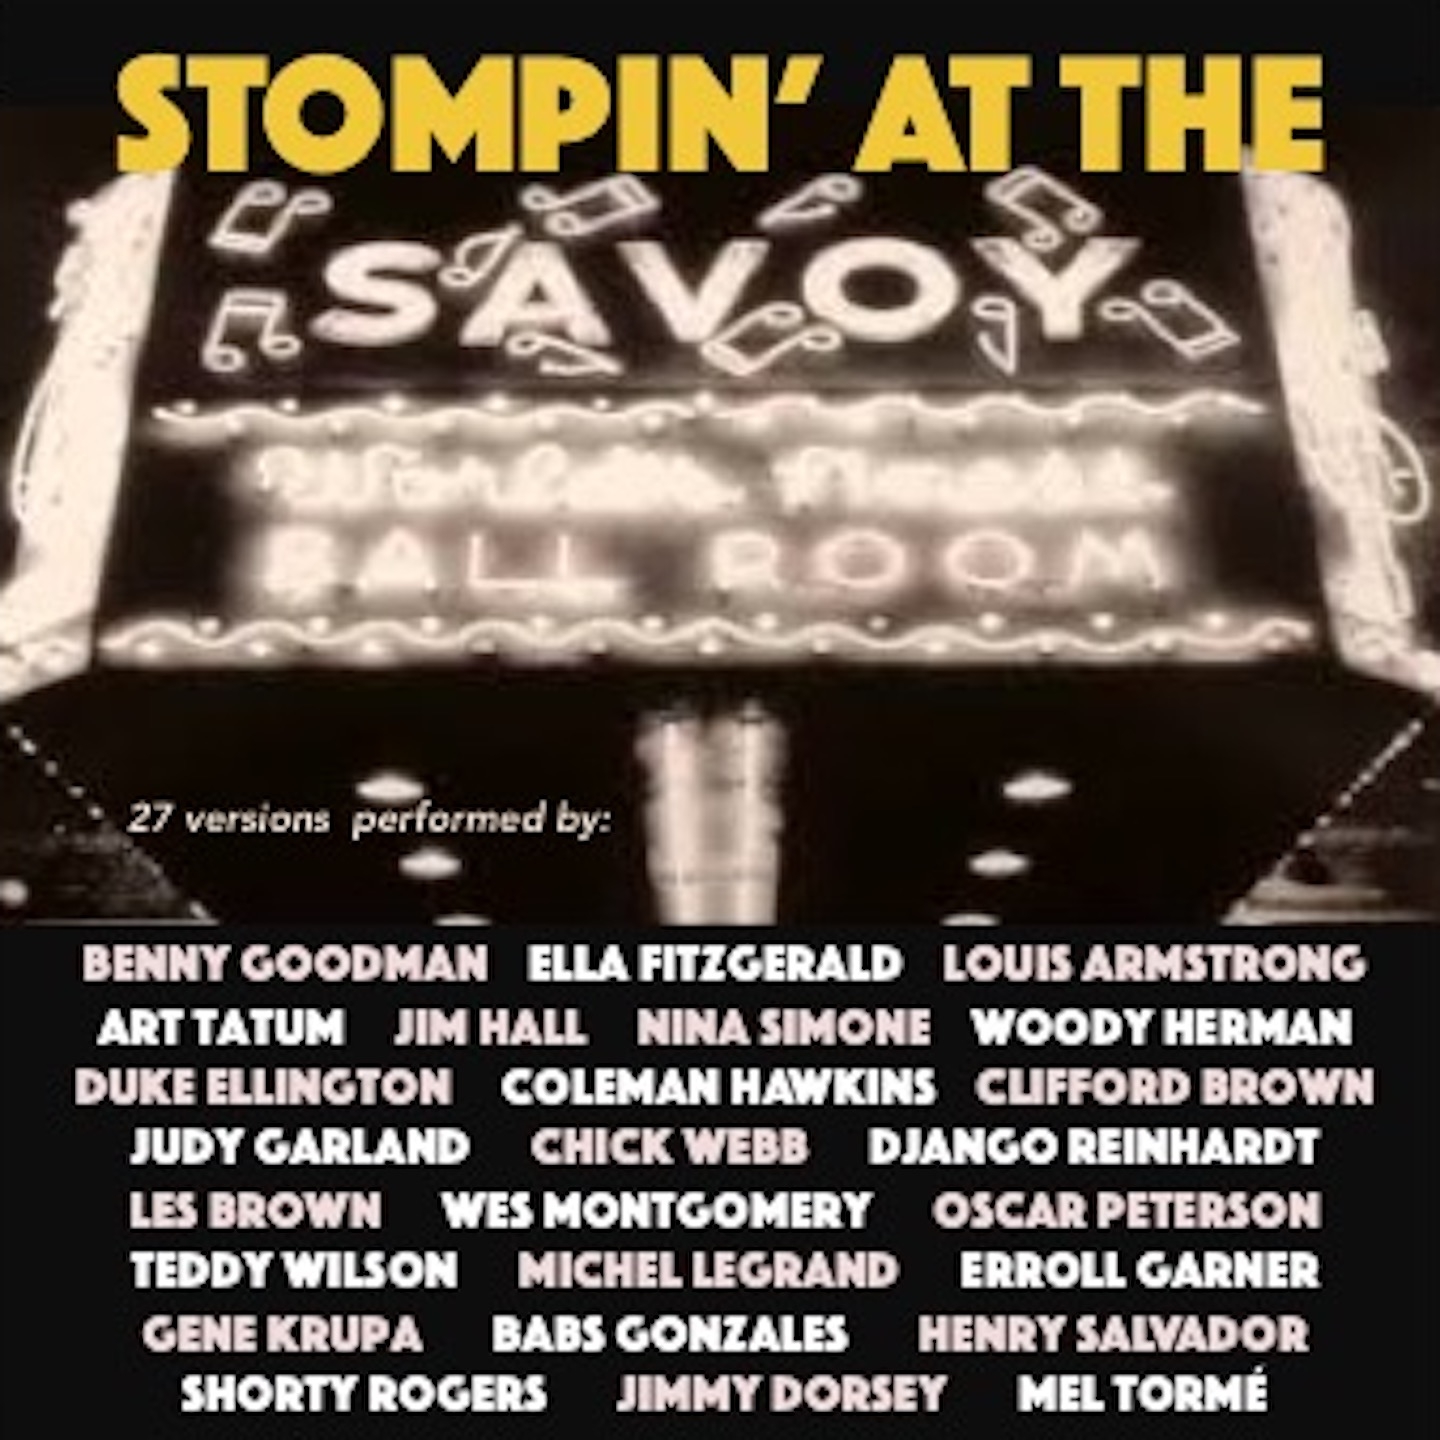 Stompin' At The Savoy (27 versions performed by:)